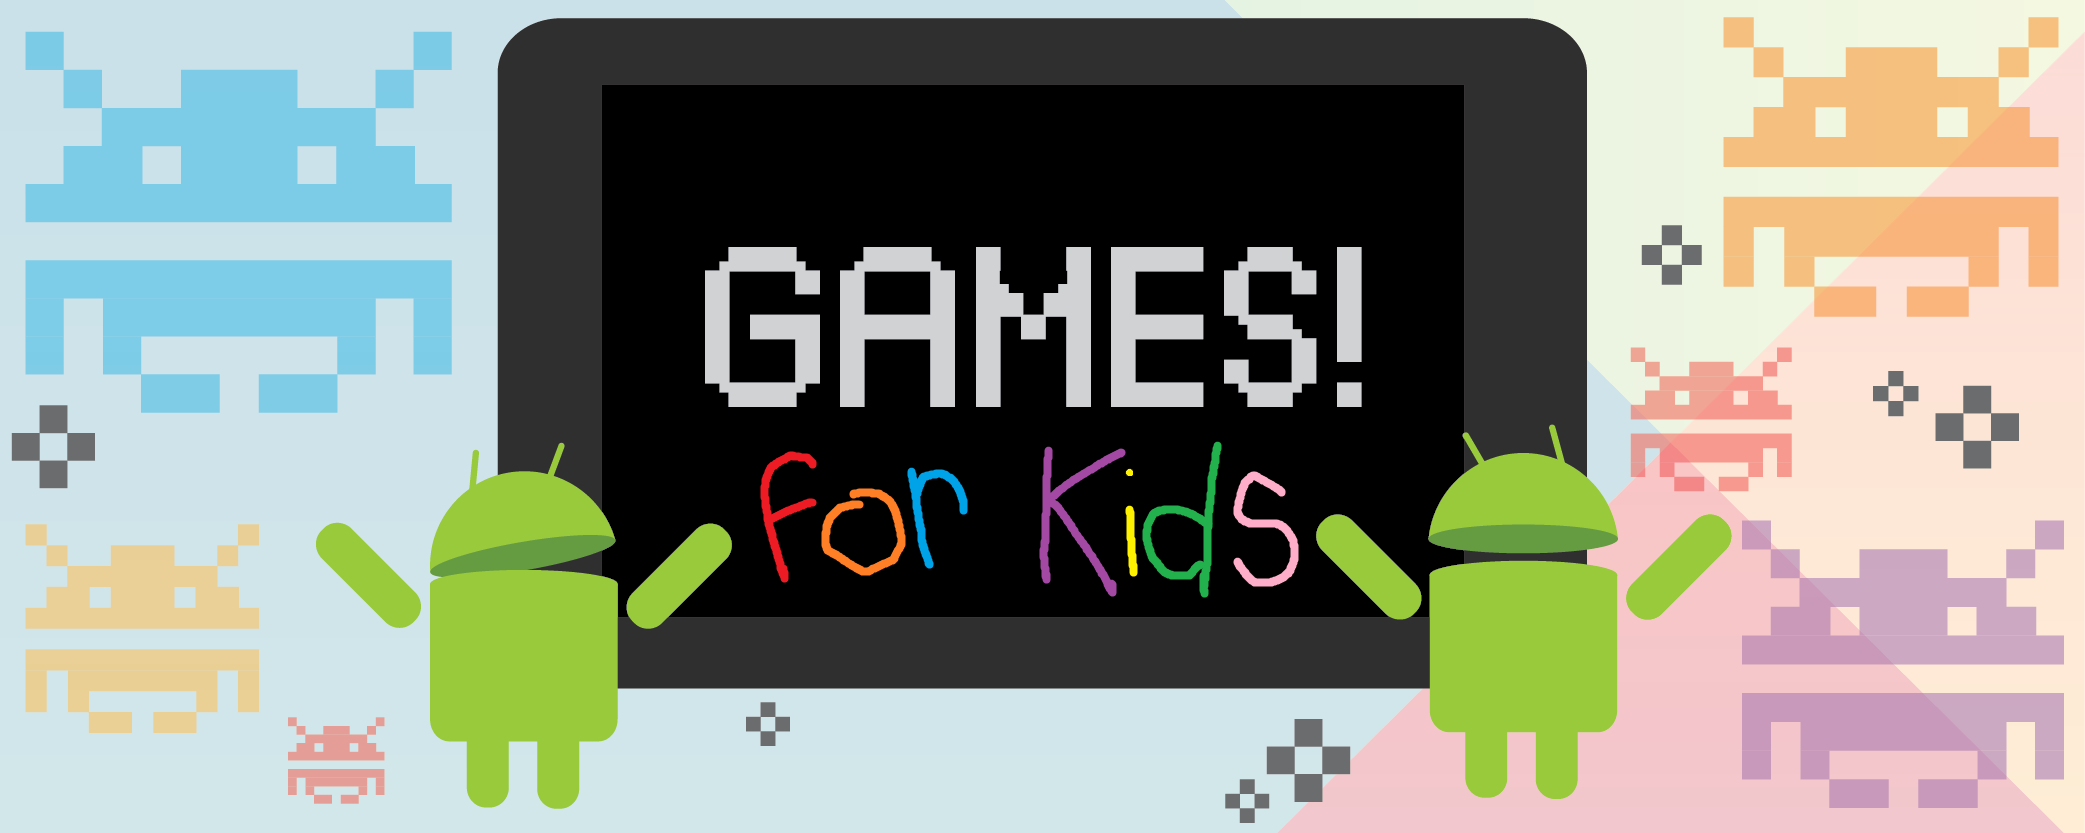 Kids School - Games for Kids - Apps on Google Play